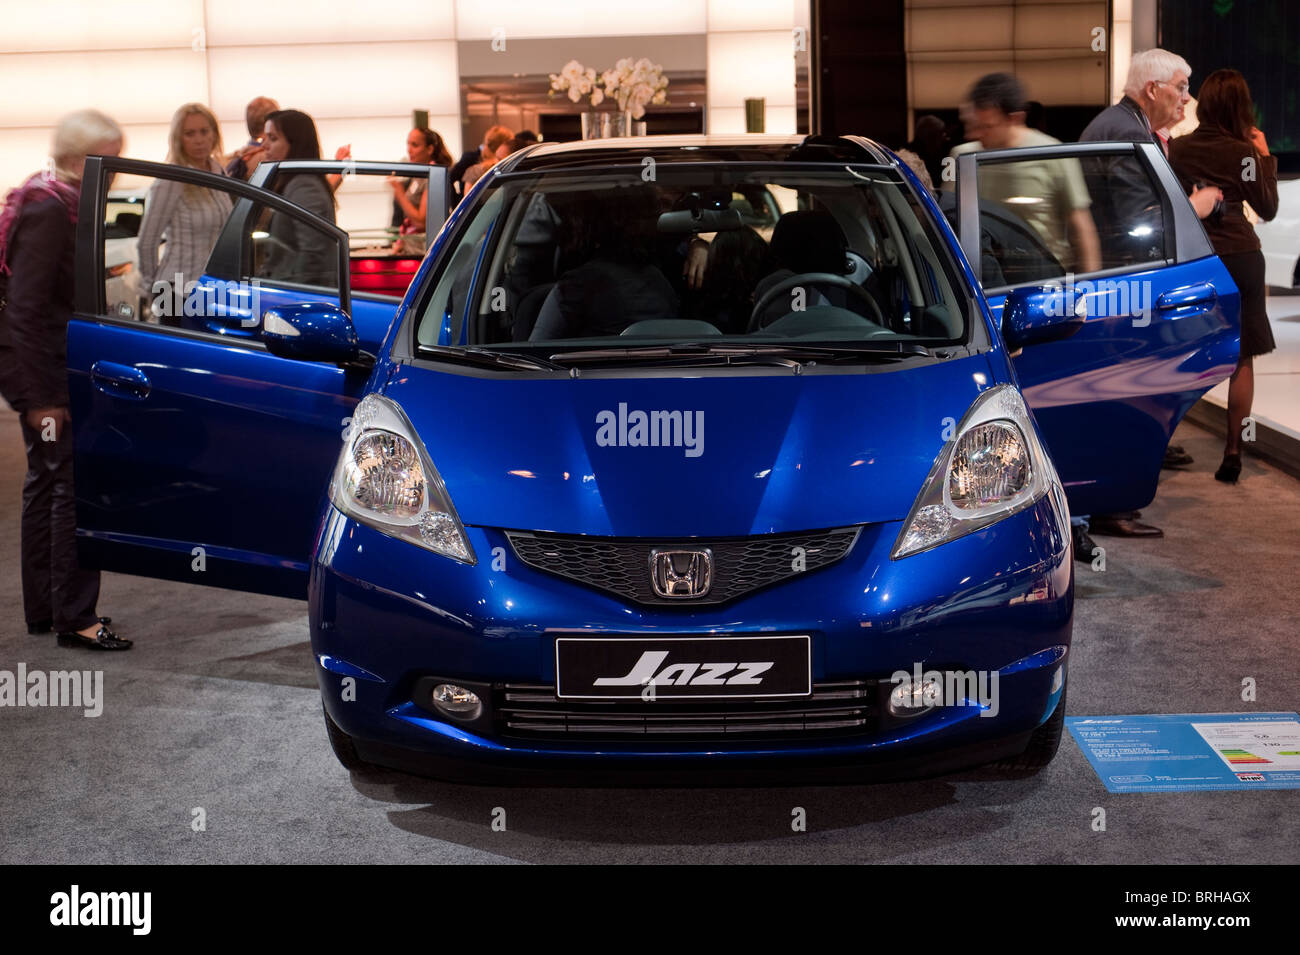 Pa-ris, France, Display, Front, Car Show, Electric Cars for sale, 'Honda jazz', Front Stock Photo